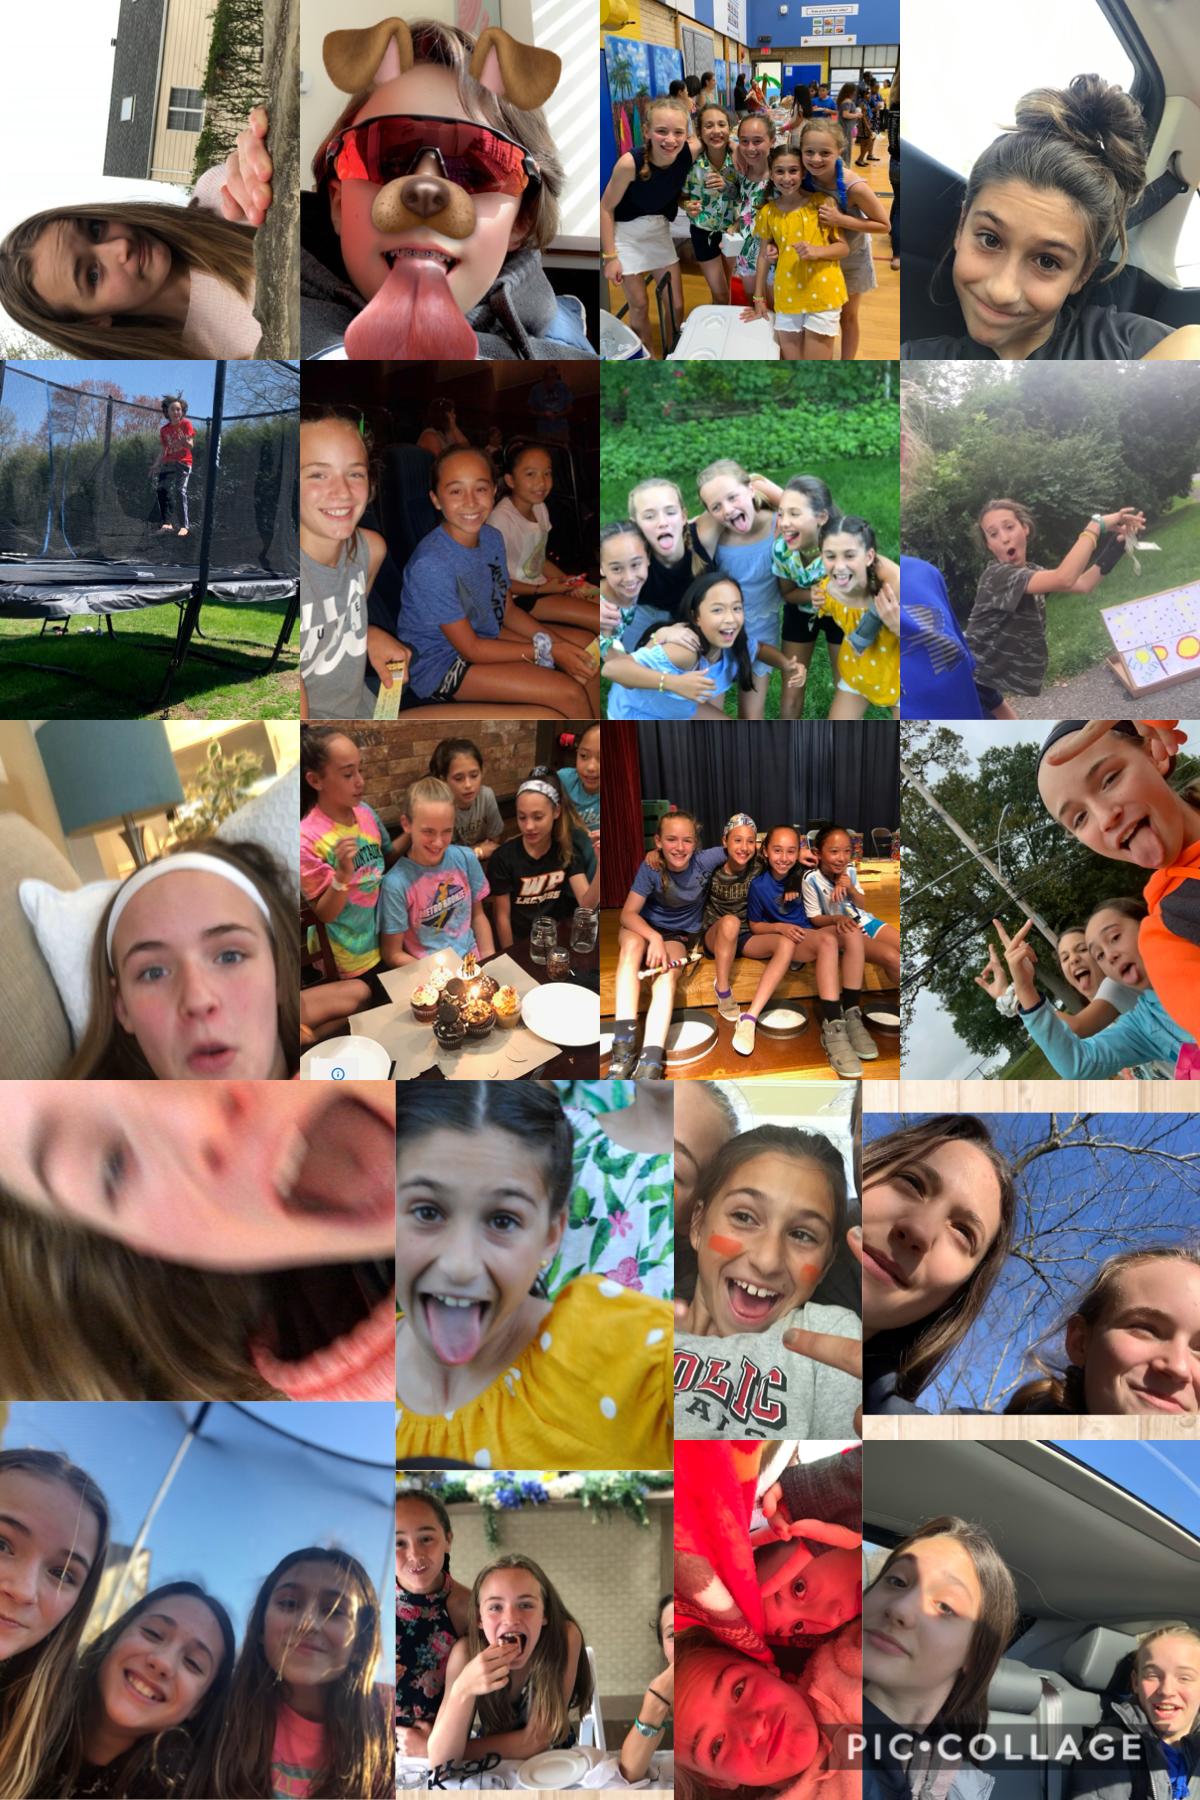                         💖 Tap 🌅
 This is just a collage of all the ppl I miss😭if you have anyone you miss remix this and put my collage next to yours✨ quarantines tough but we’ll get through it💖